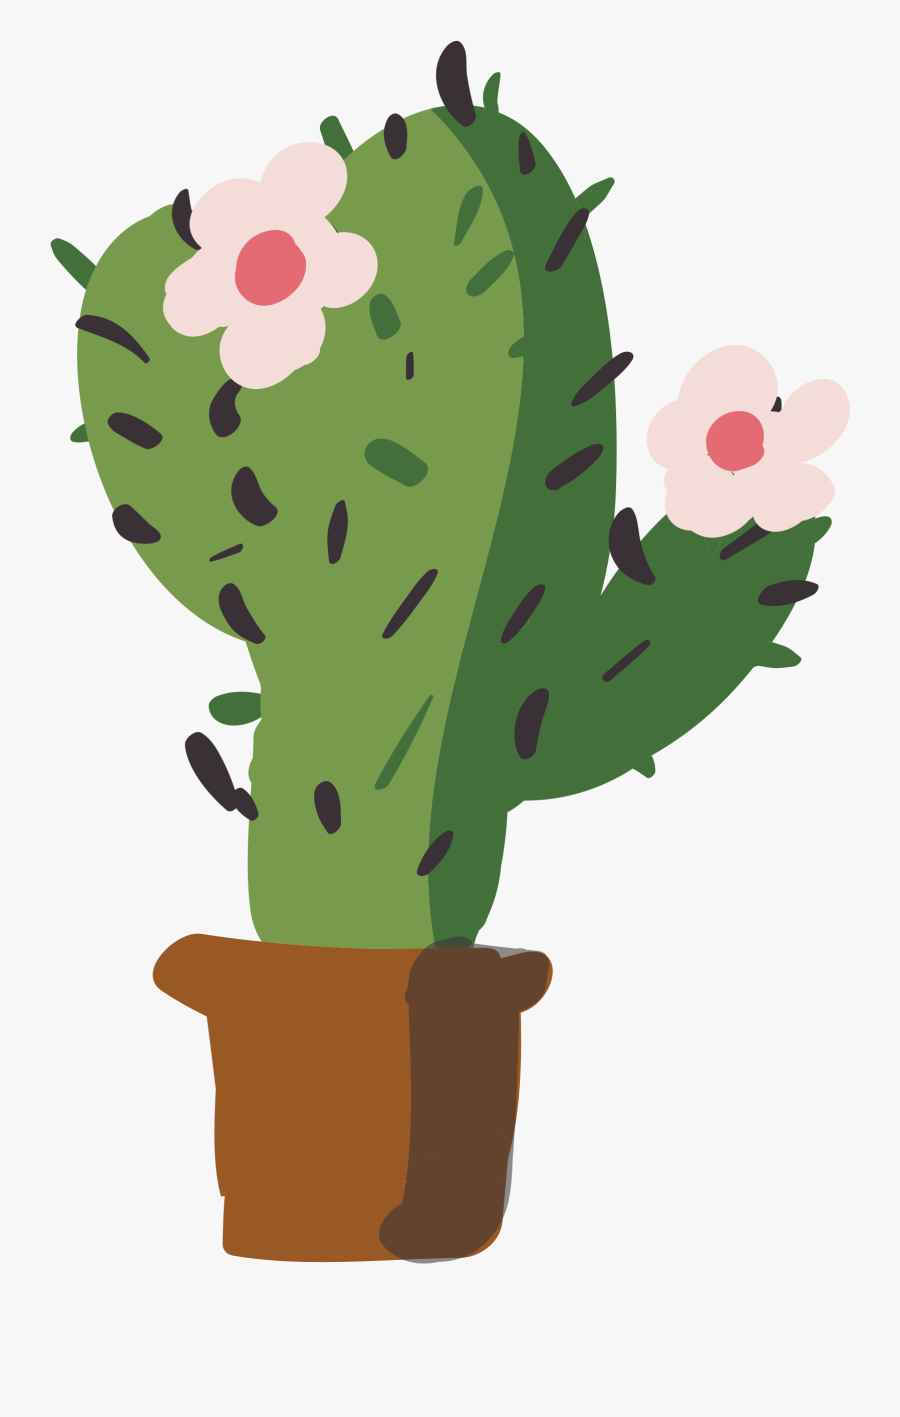 Drawn Cactus Abstract Watercolor - Cactus With Flowers Drawing, Transparent Clipart